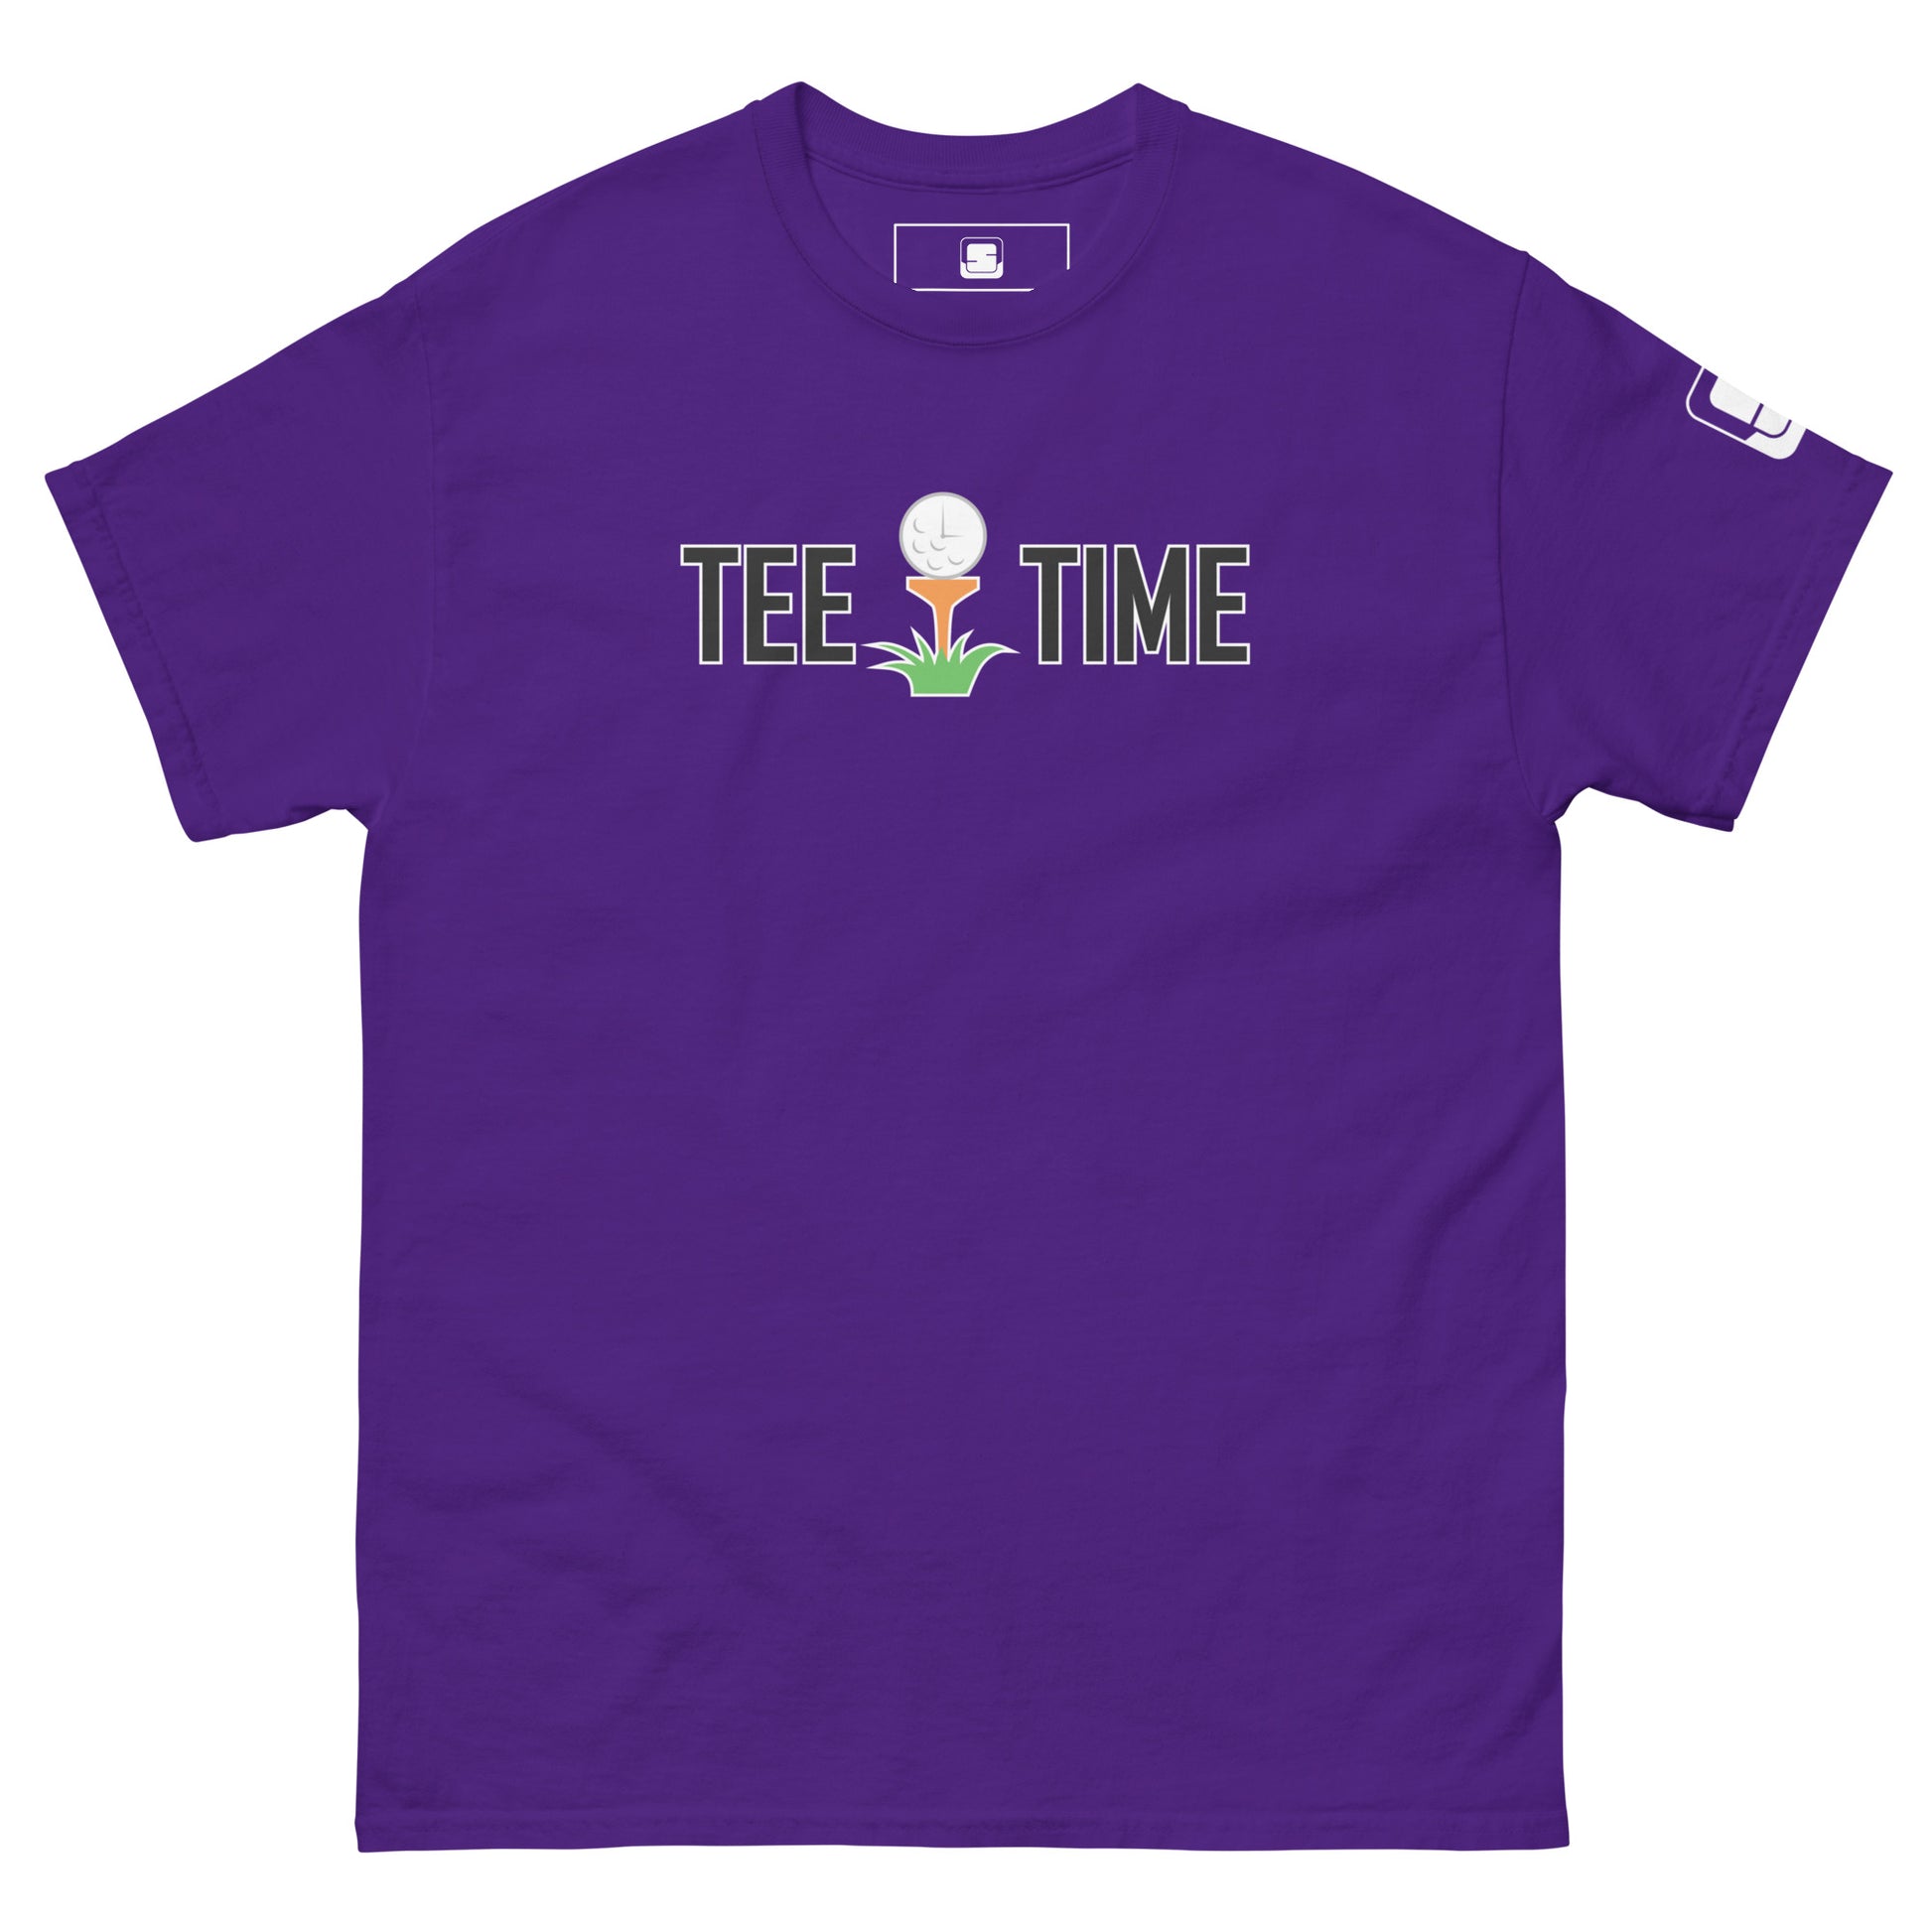 The image presents a bold purple t-shirt with the text "TEE TIME" and an image of a golf ball on a tee with a small green sprout at the base. The graphic is centered on the chest area. A small white logo appears on the right sleeve. The t-shirt is spread out flat to display its design clearly against a plain background, highlighting the vibrant color and the playful, golf-inspired motif